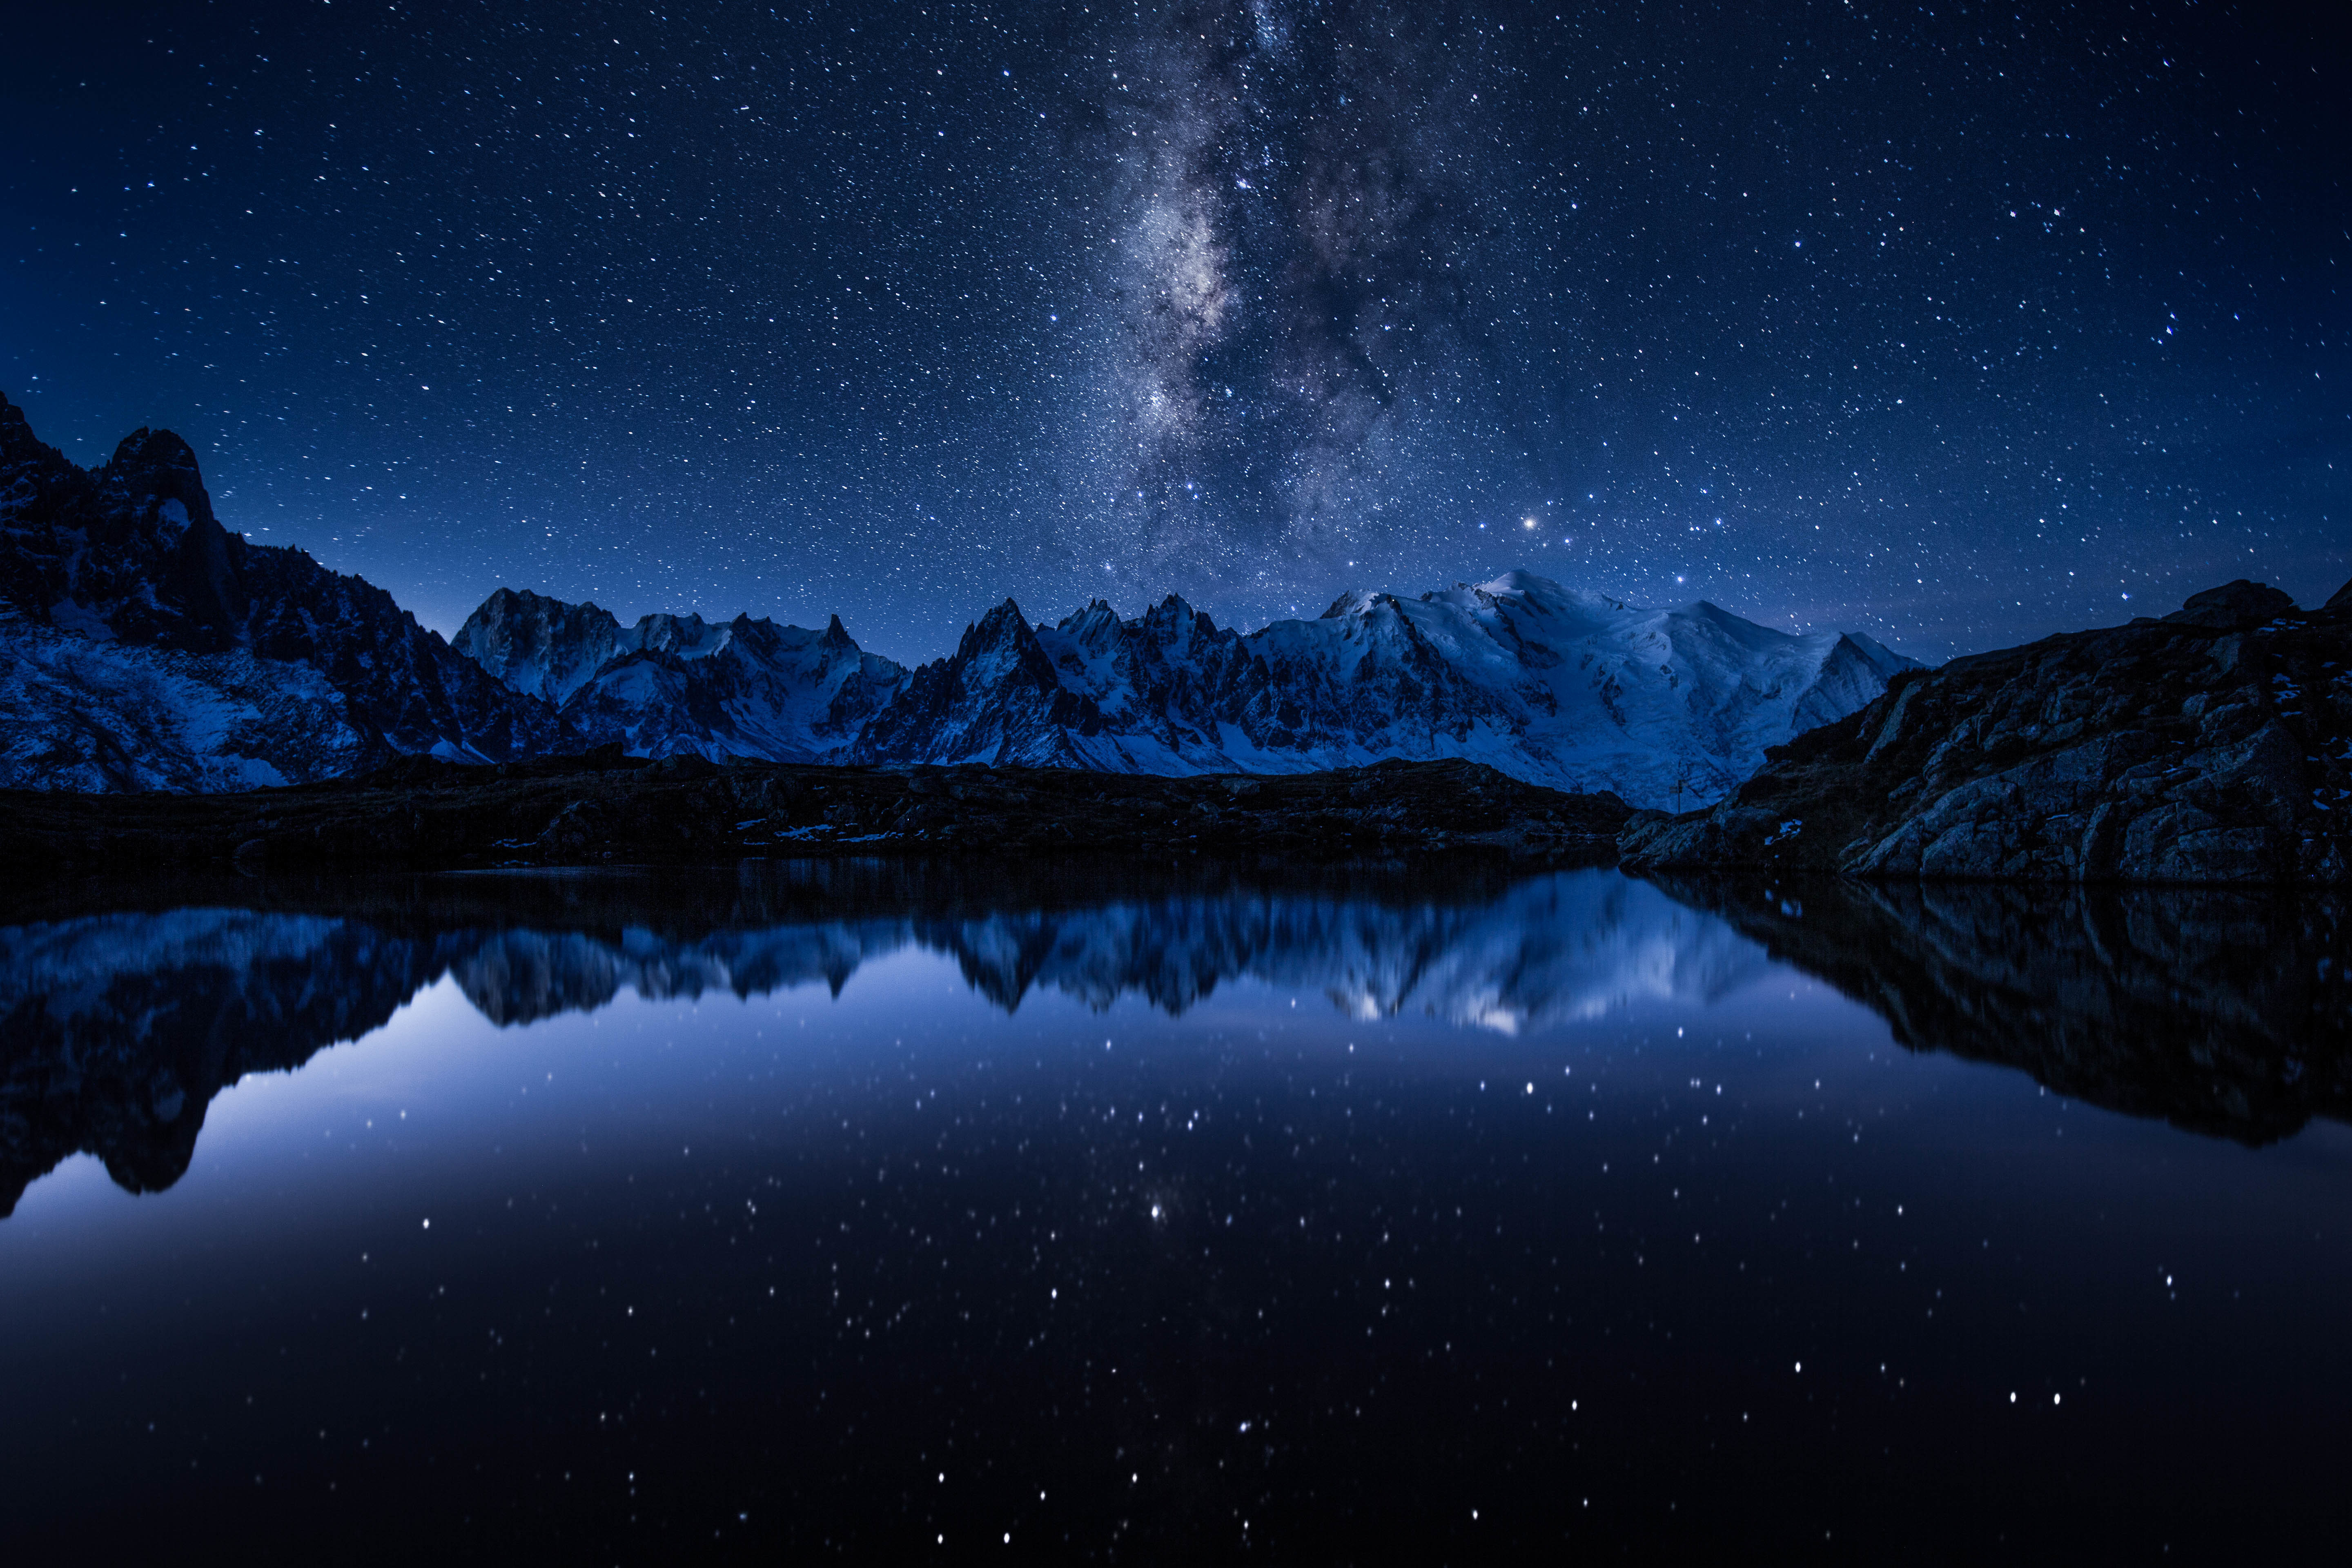 A starry sky over a large lake